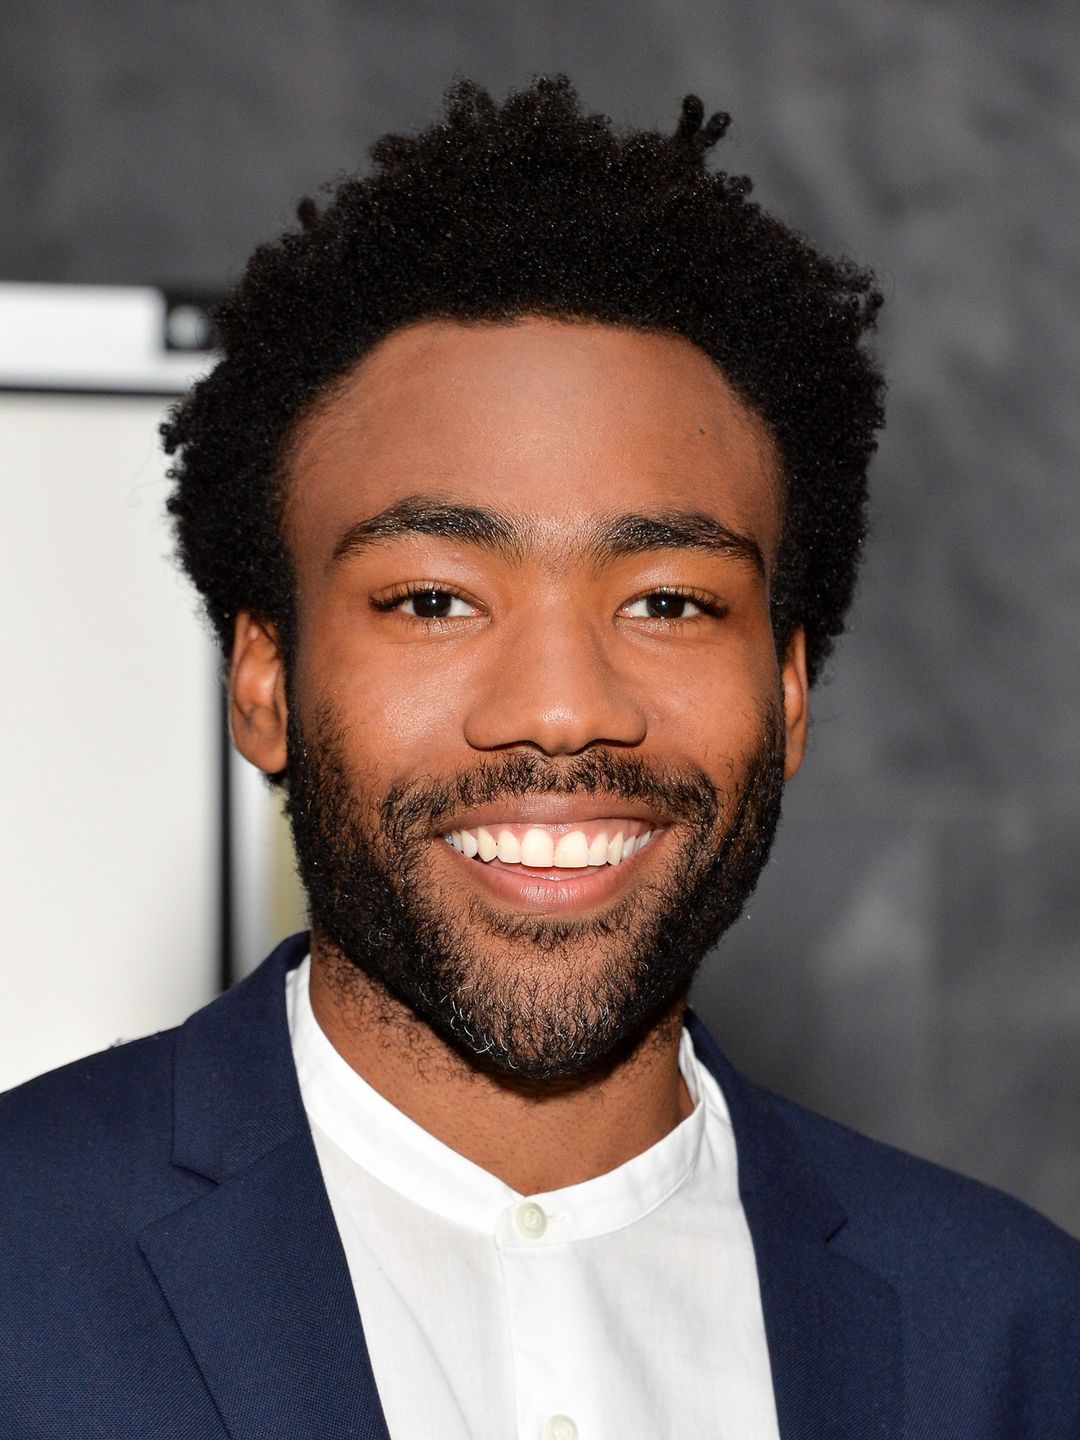 Donald Glover how did he became famous